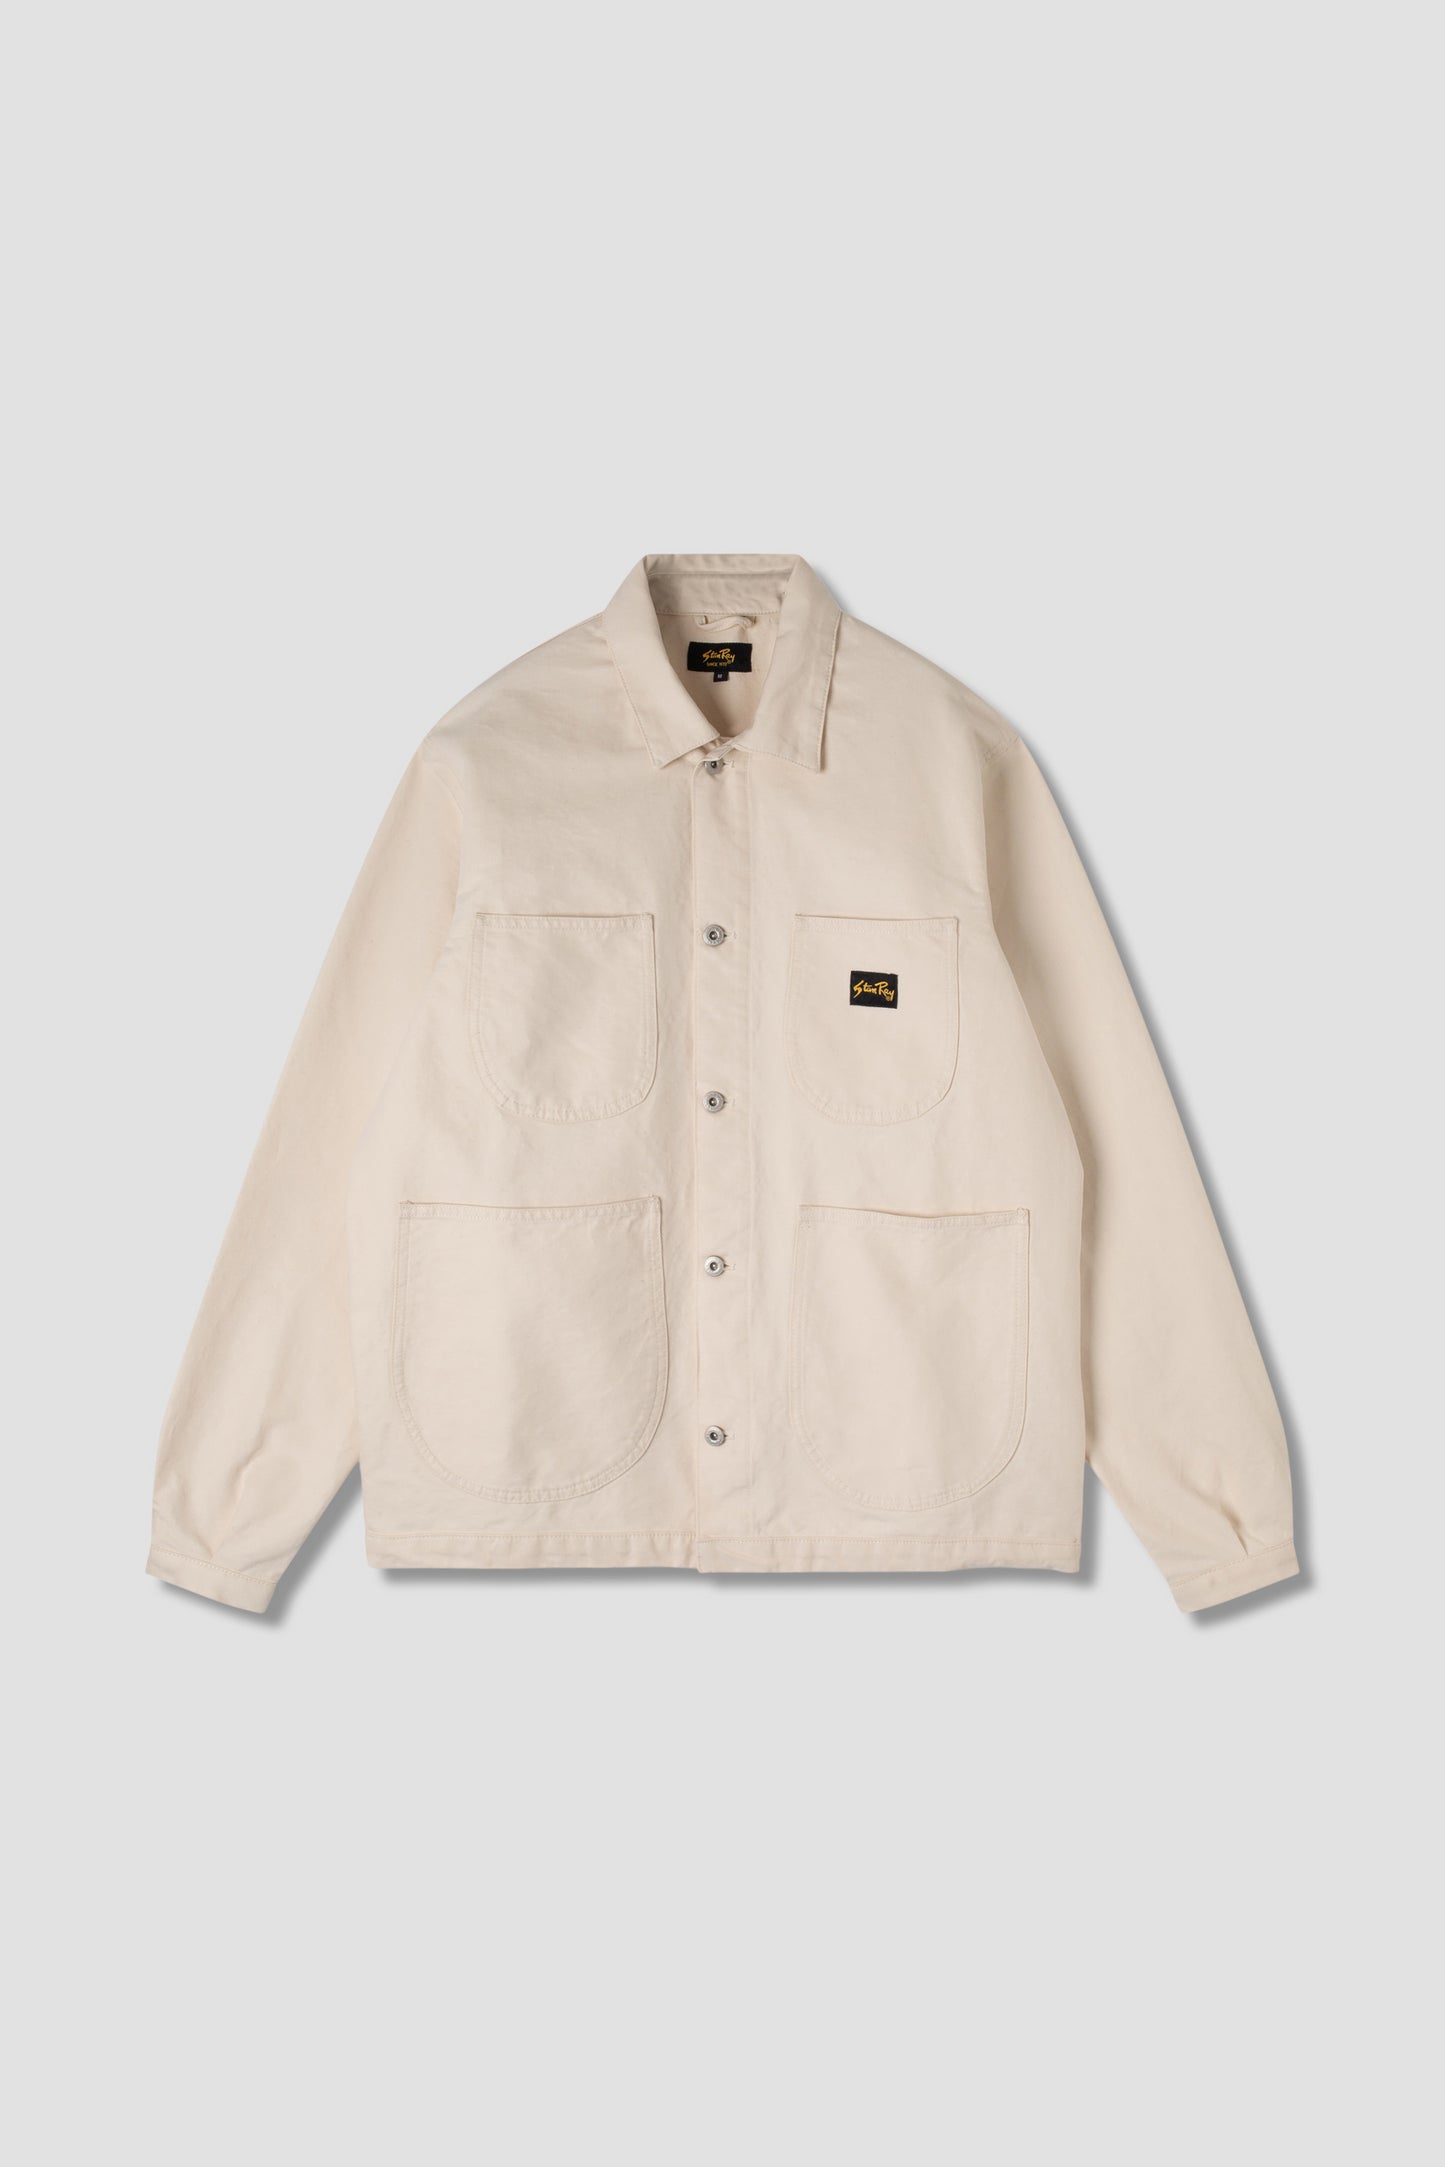 Coverall Jacket, Unlined (Natural Twill)